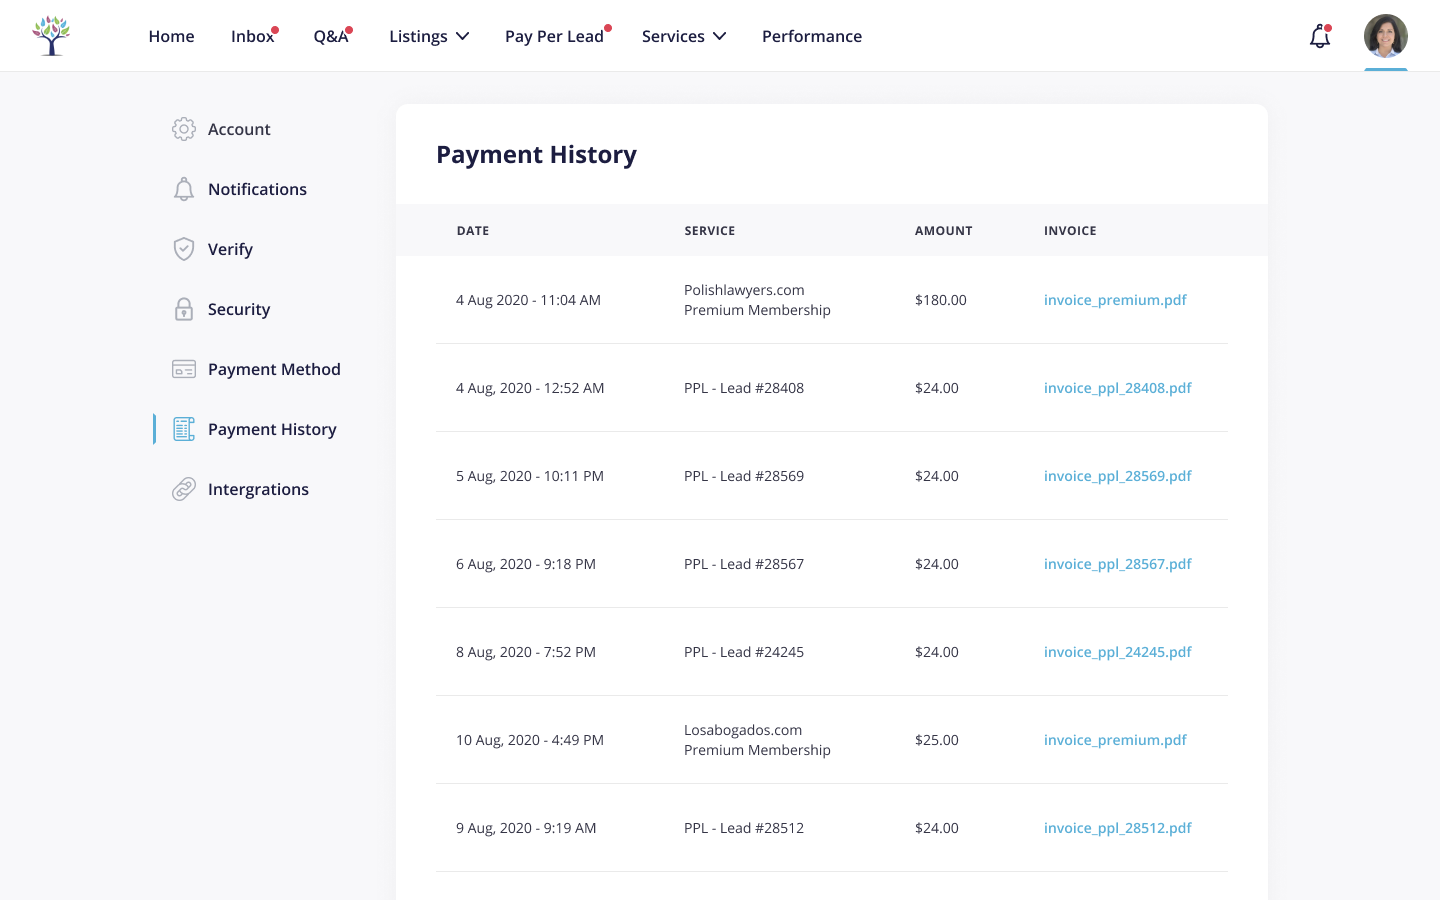 Dashboard - Payment History